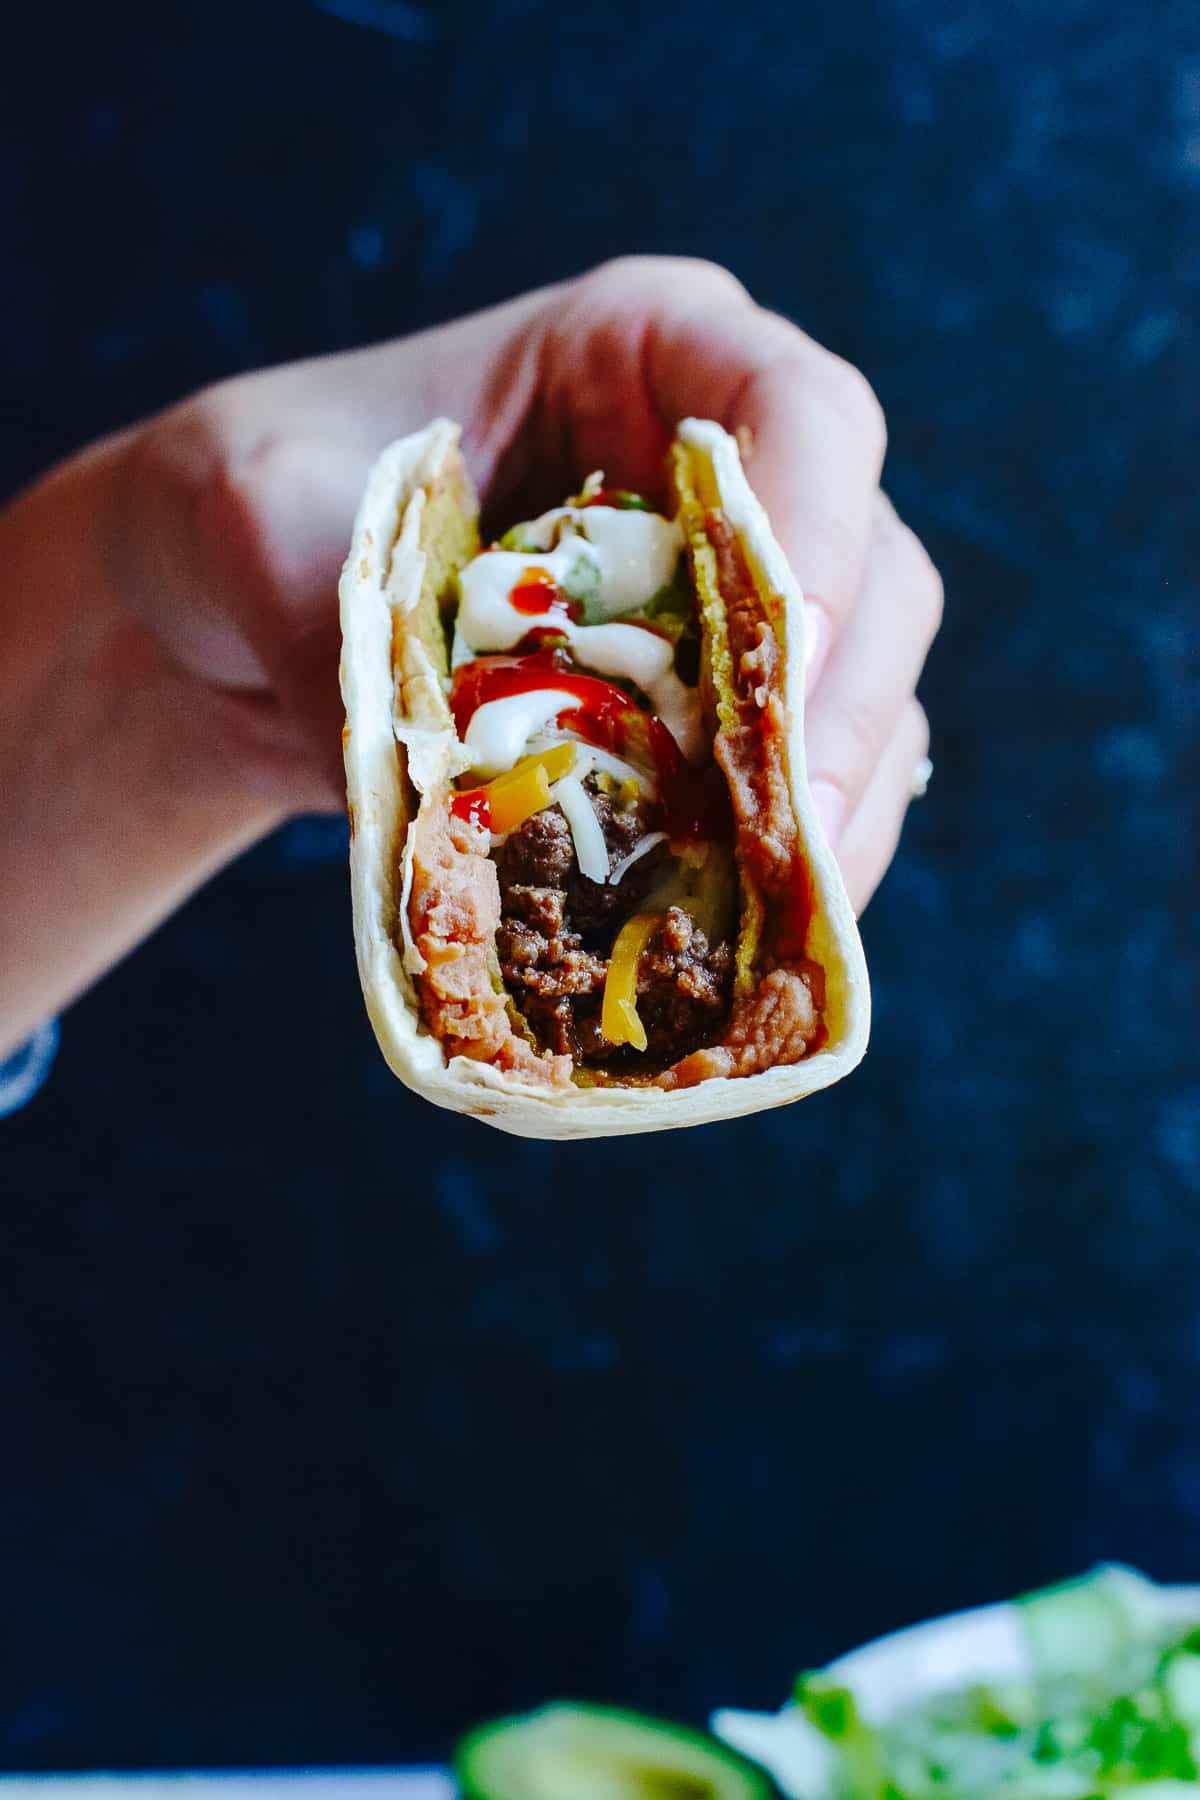 Hand holding a double decker taco with beef, beans and sauces.